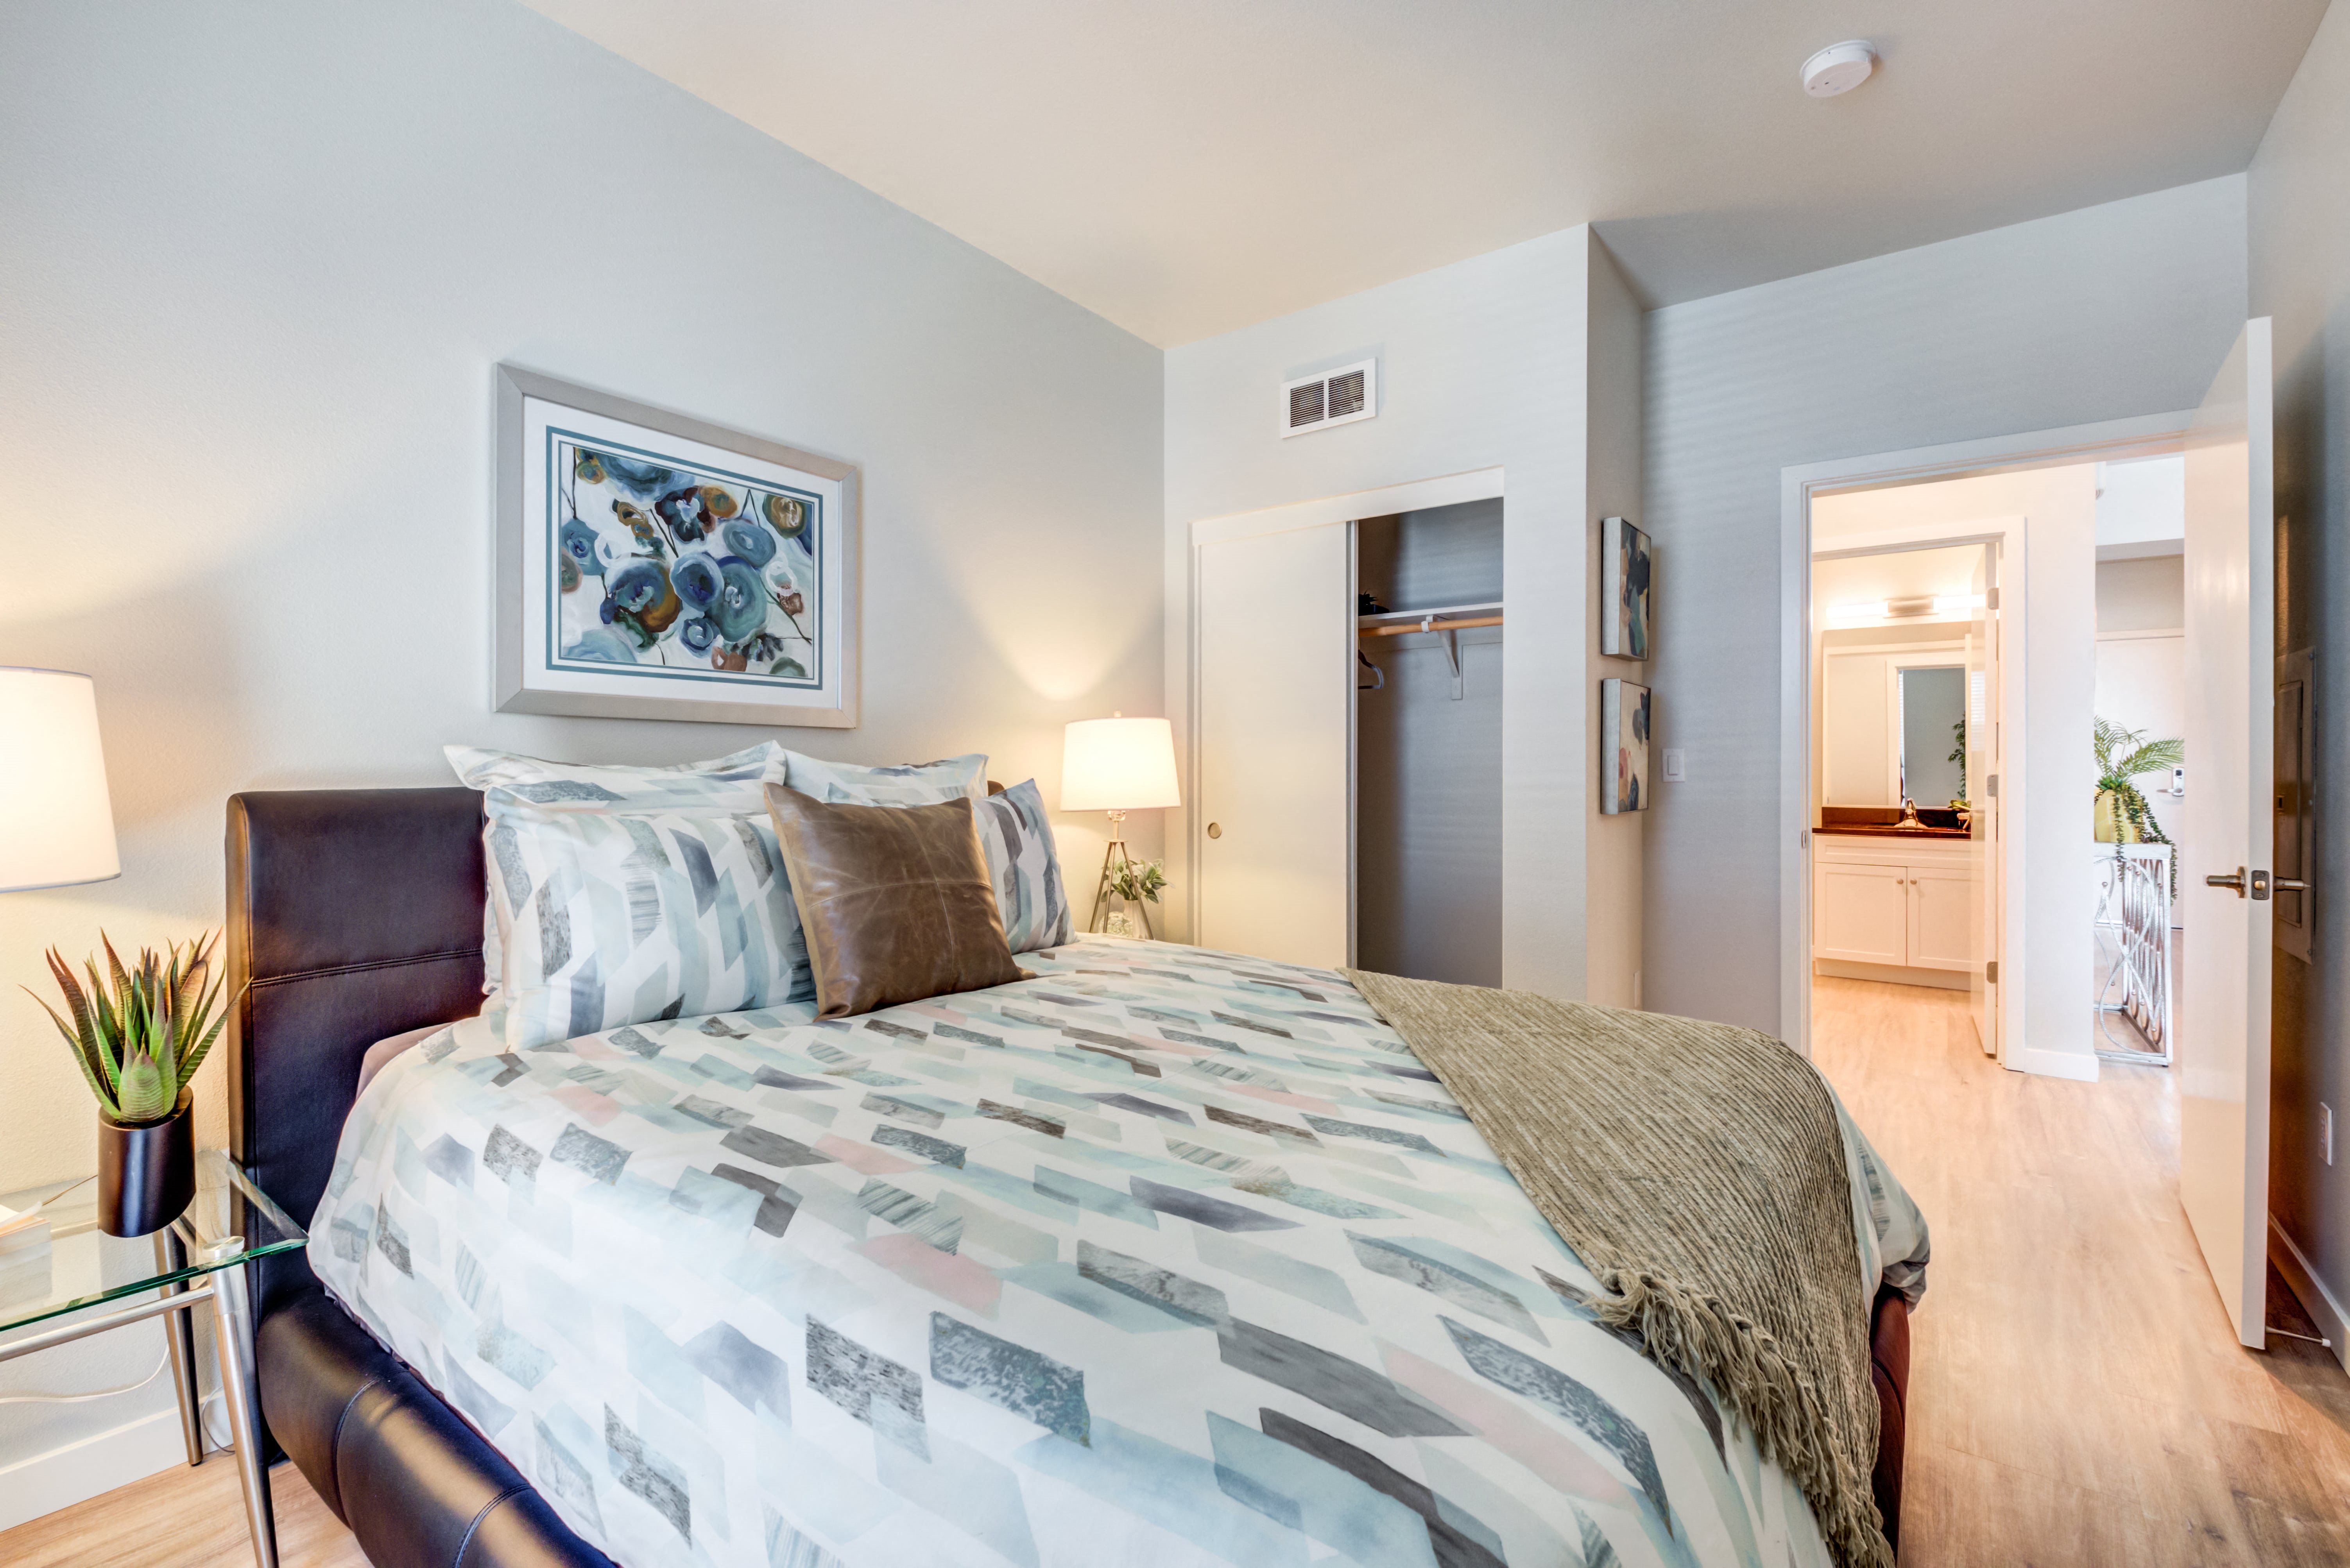 Luxury One-Bedroom Apartments in Uptown Oakland, CA - Rowhaus Apartments Bedroom with Large Window and Spacious Closet